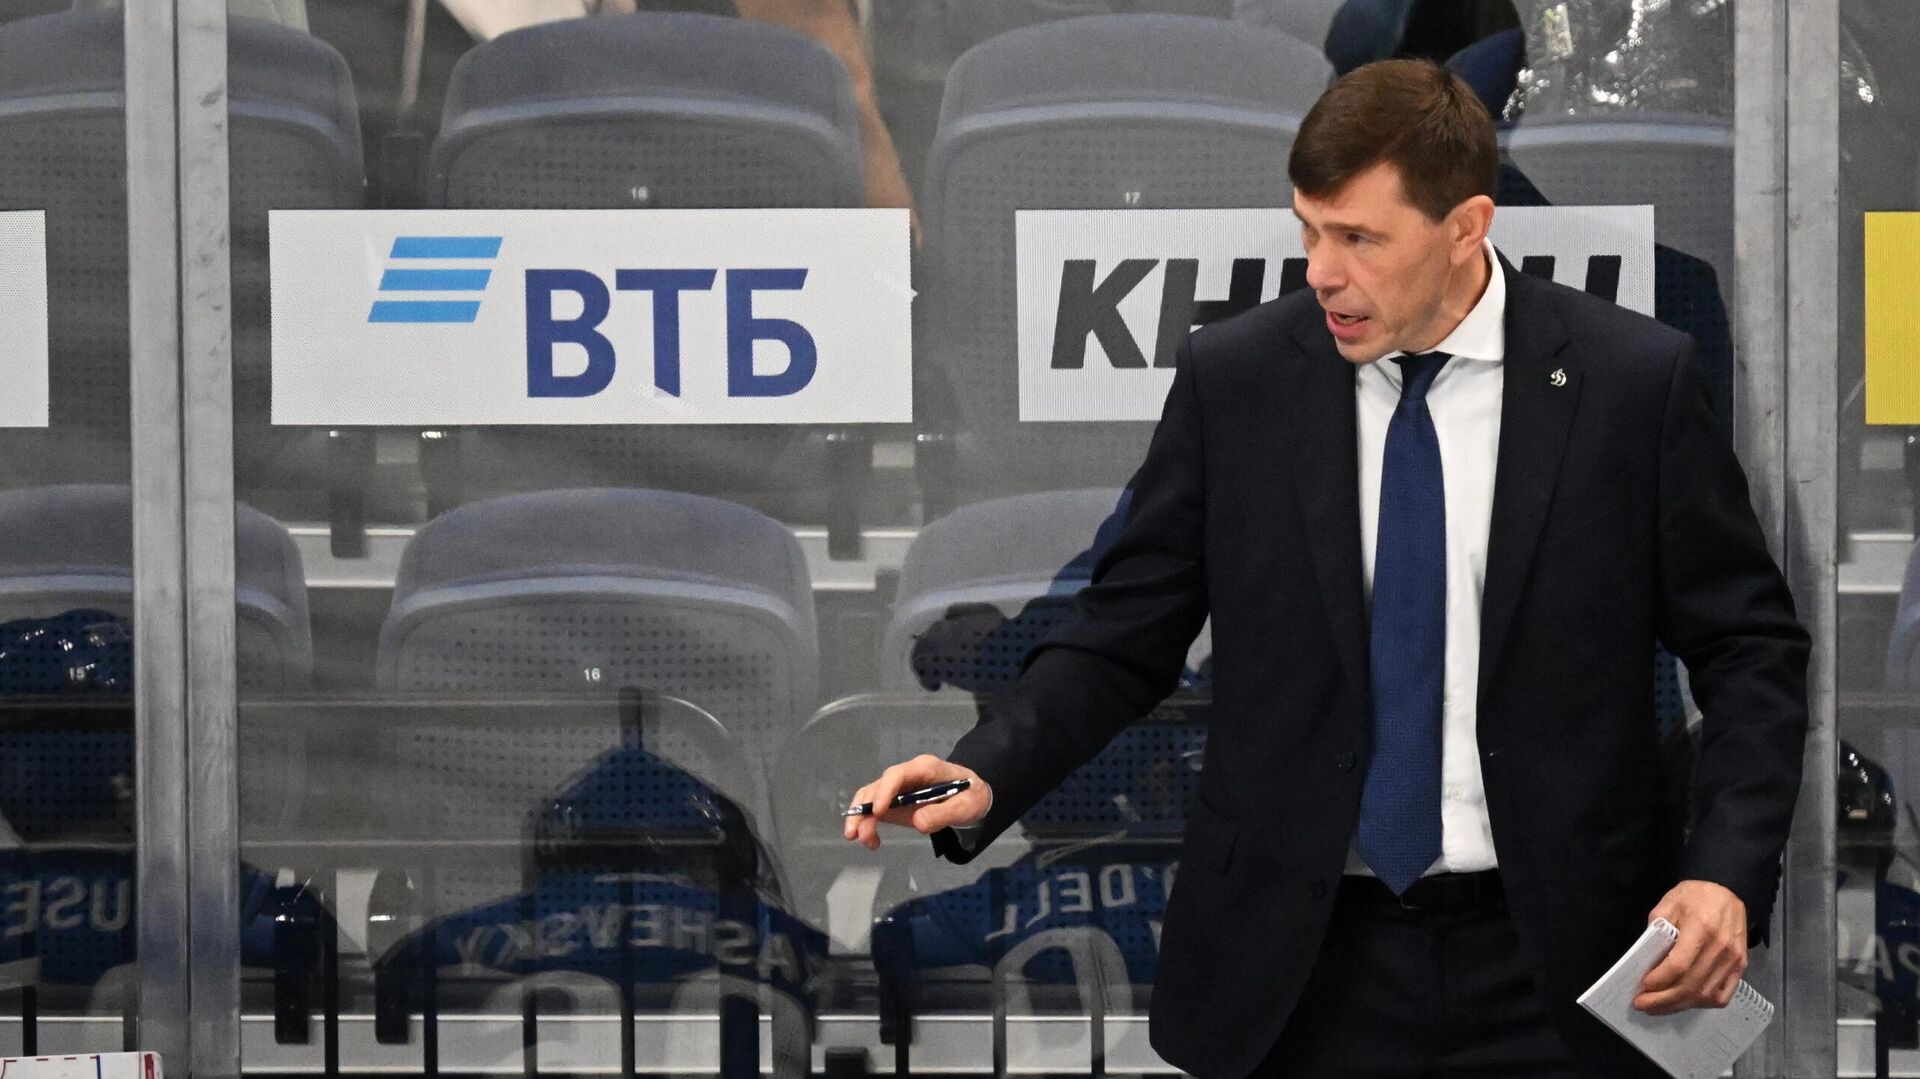 Dinamo coach calls for clean power move on injured opponent